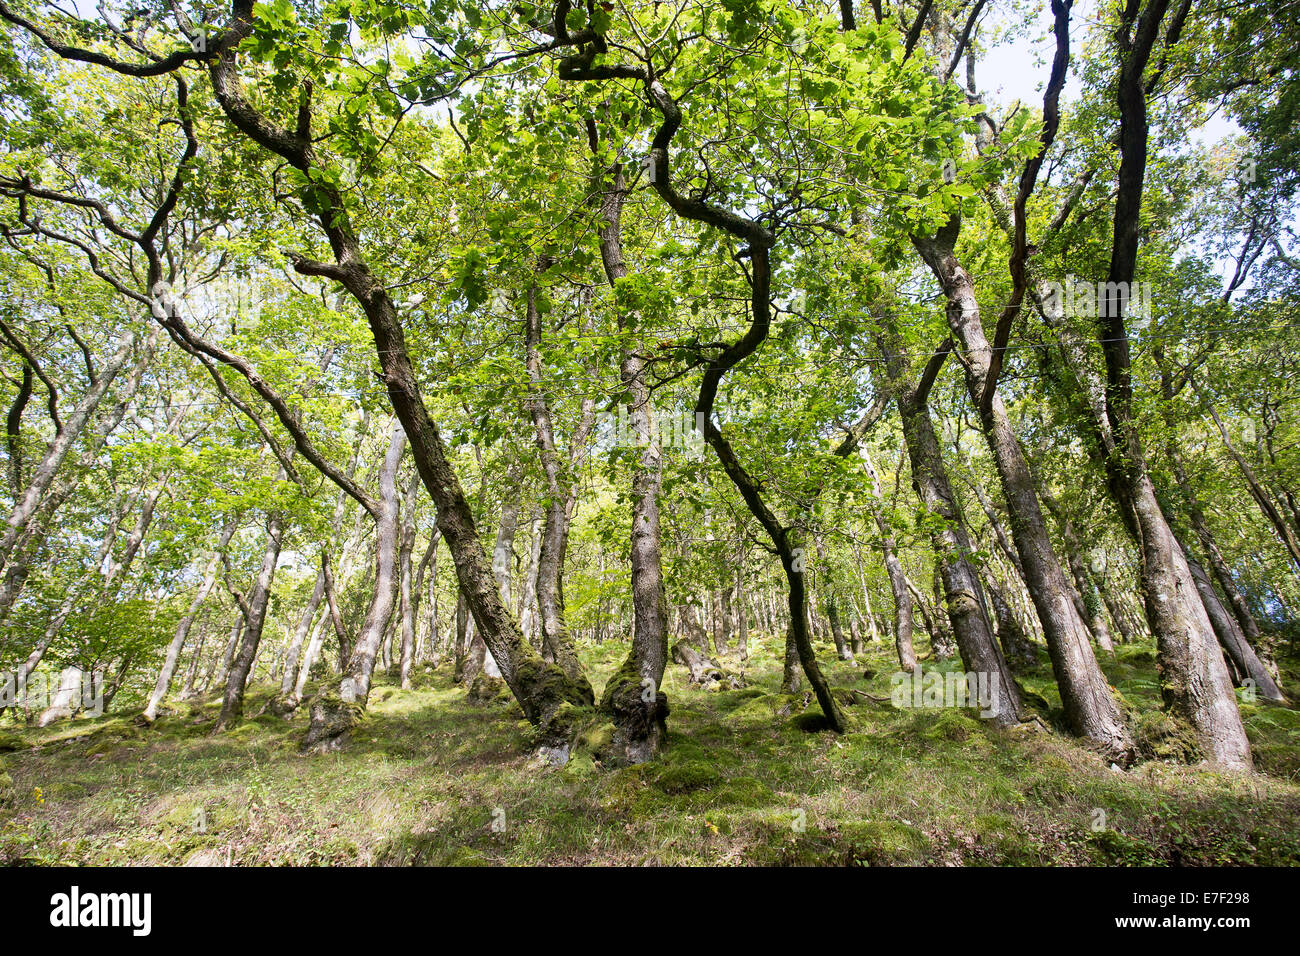 valley old trees forest dappled leaves branches Stock Photo